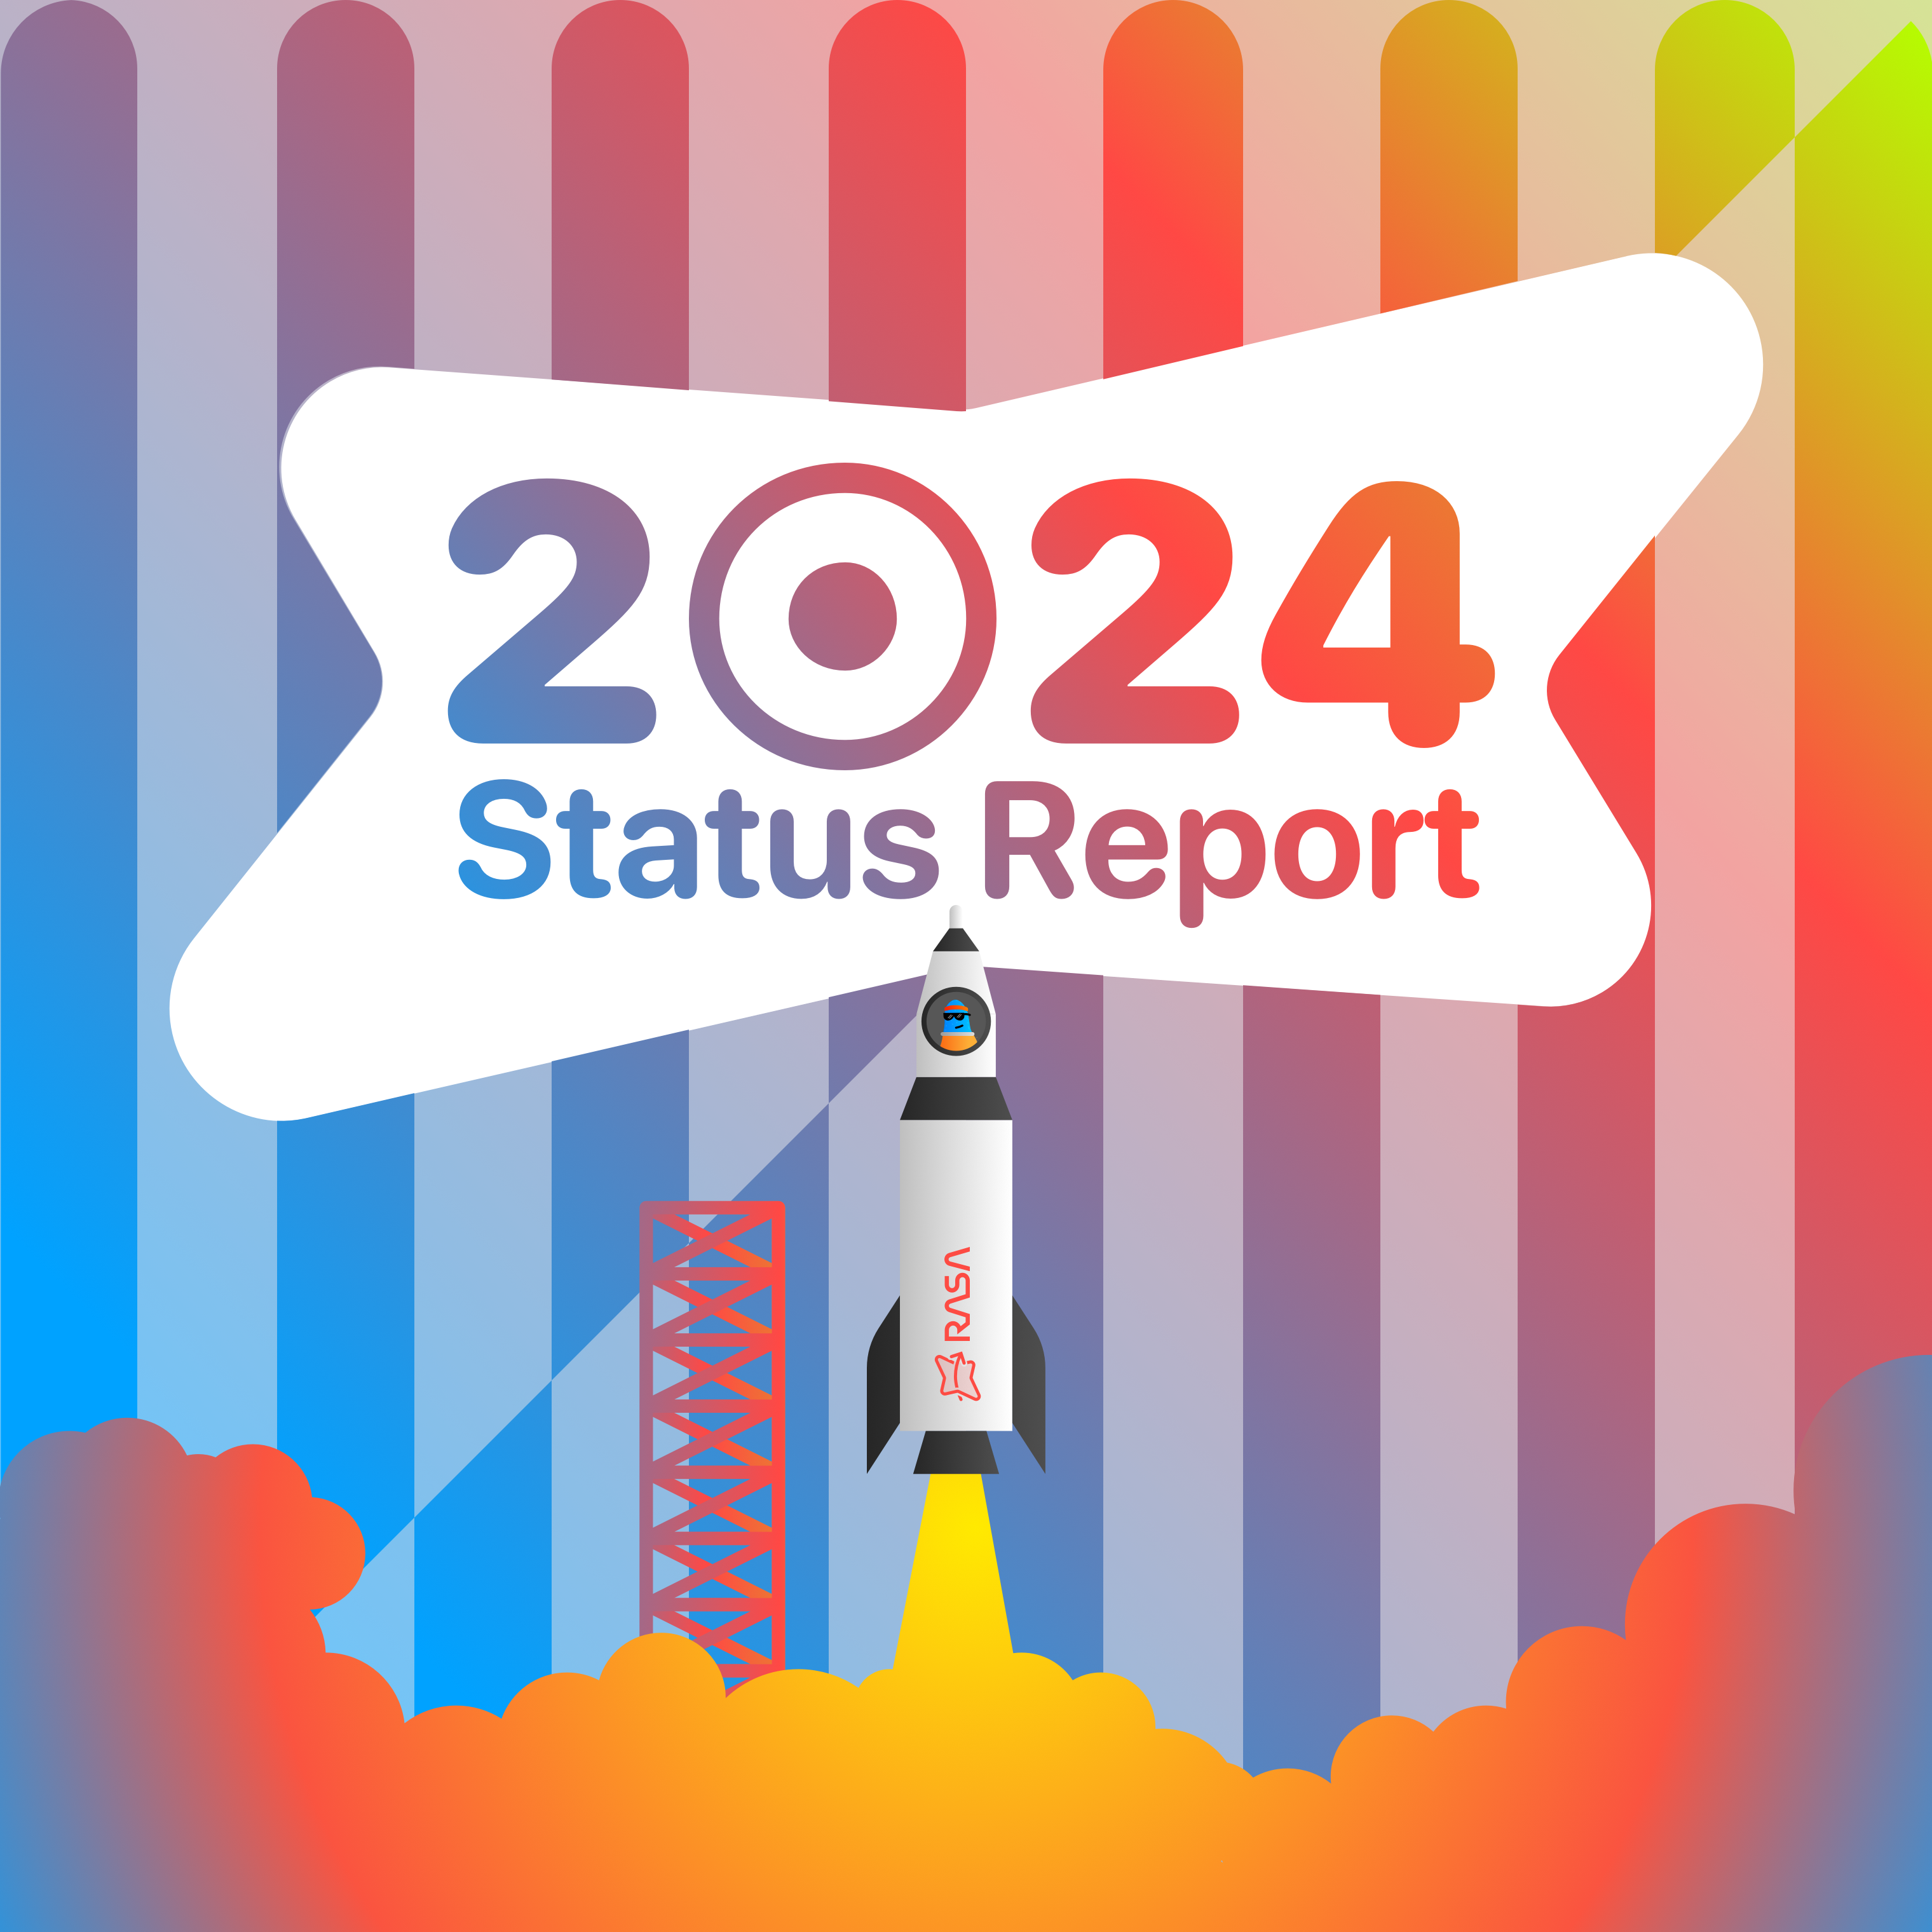 A cartoon rocket launch, with the text “2024 Status Report”